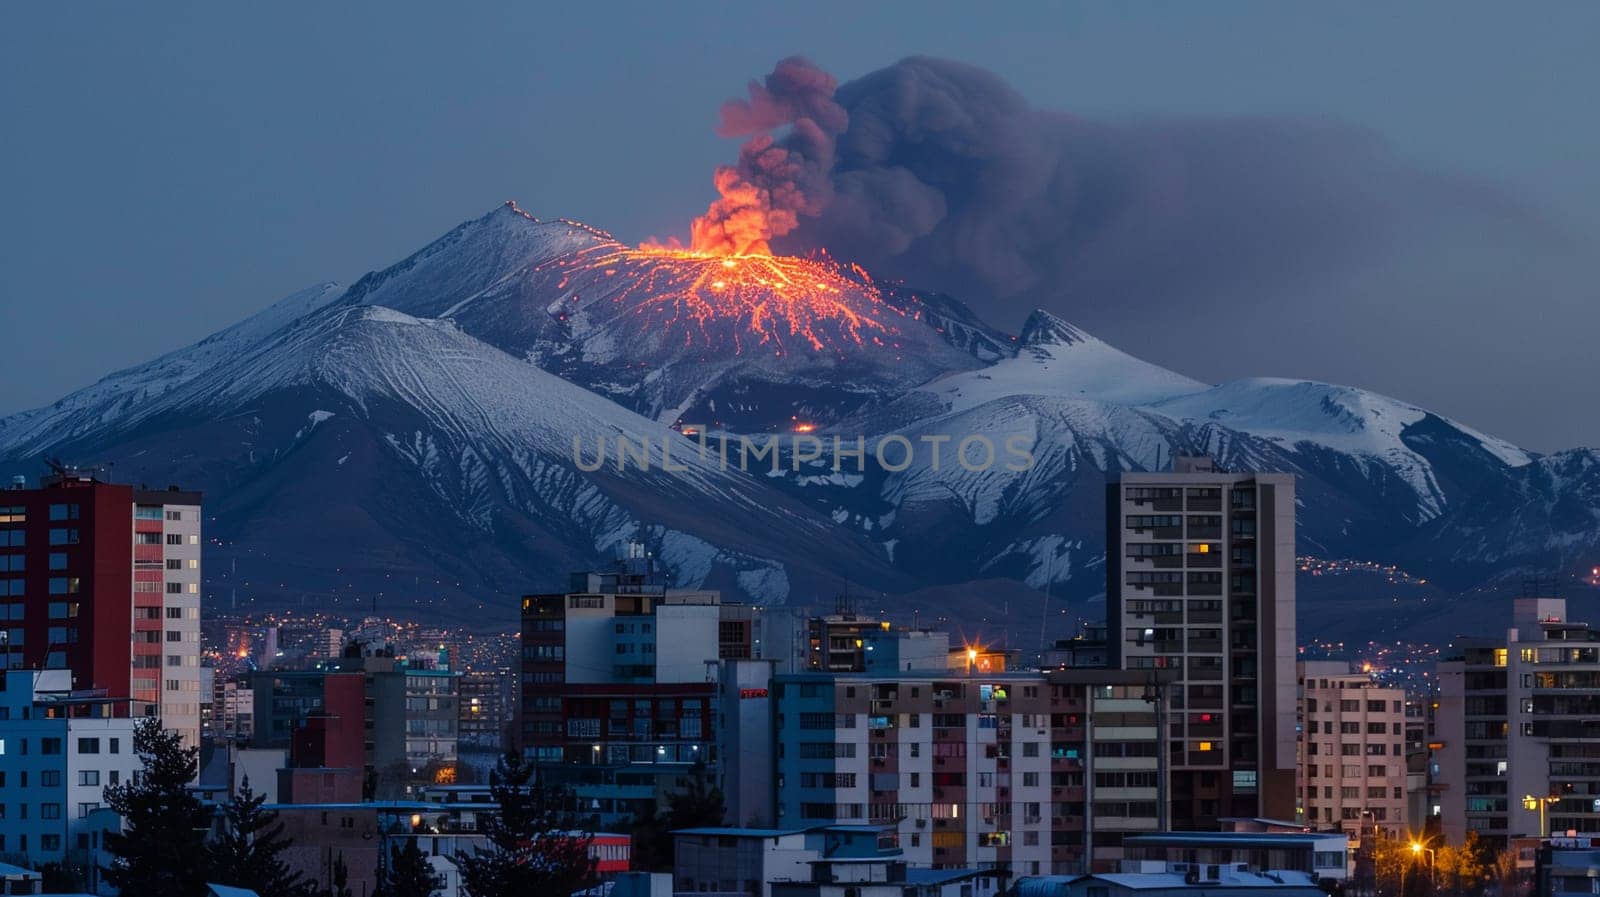 City life persists under the threat of a fiery volcanic eruption in snow-covered mountains during twilight